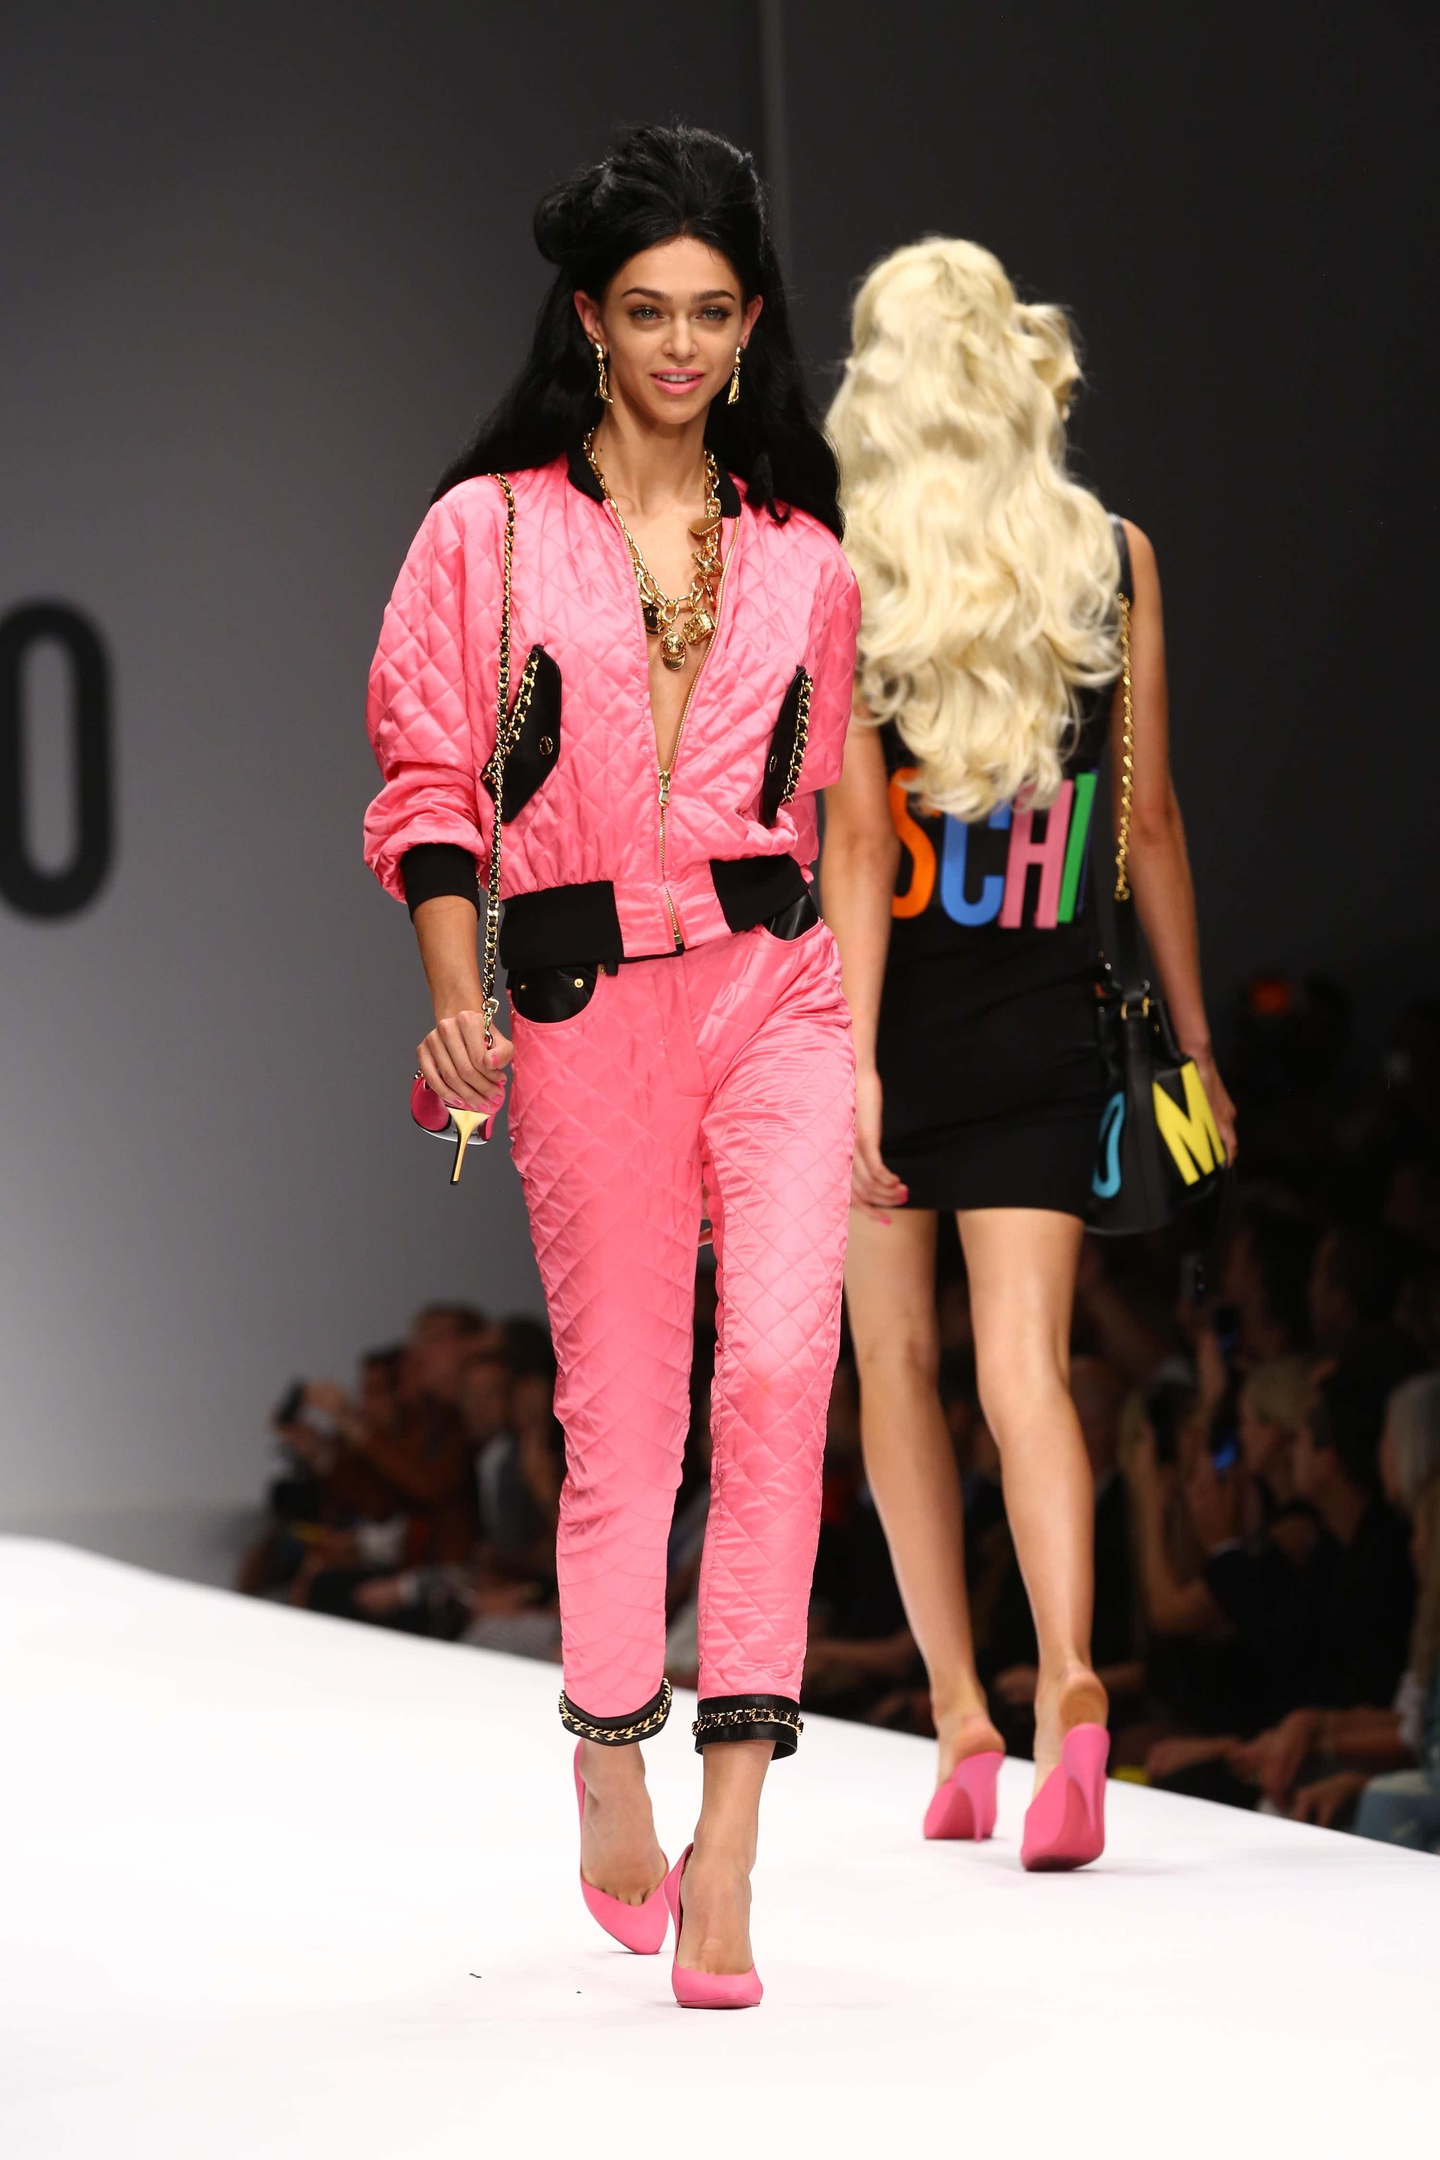 Jeremy Scott exits Moschino after a decade of cheeky, pop culture-saturated  collections